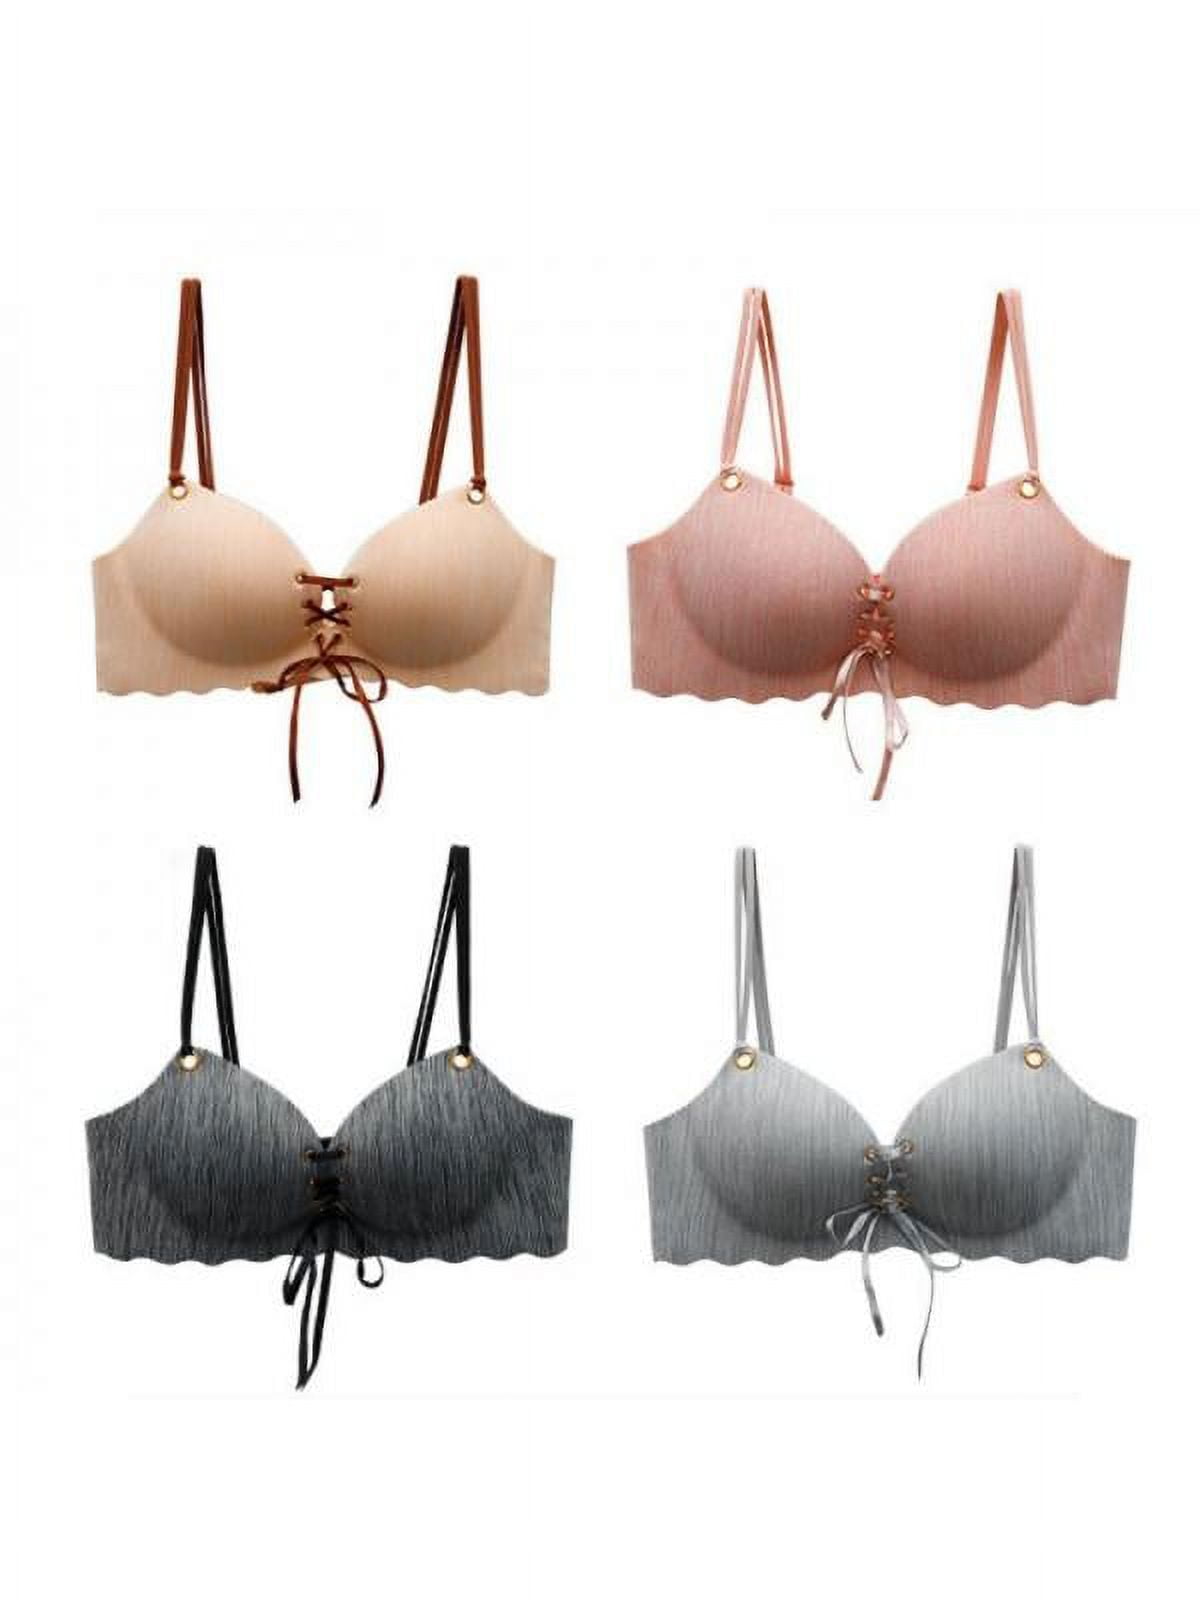 Simple Design Sexy Seamless Bra Women Fashion Push Up Bras Soft Bra Feamale  Lingerie for 999 kes only. Free sizes fits 32-36. 0746898530…